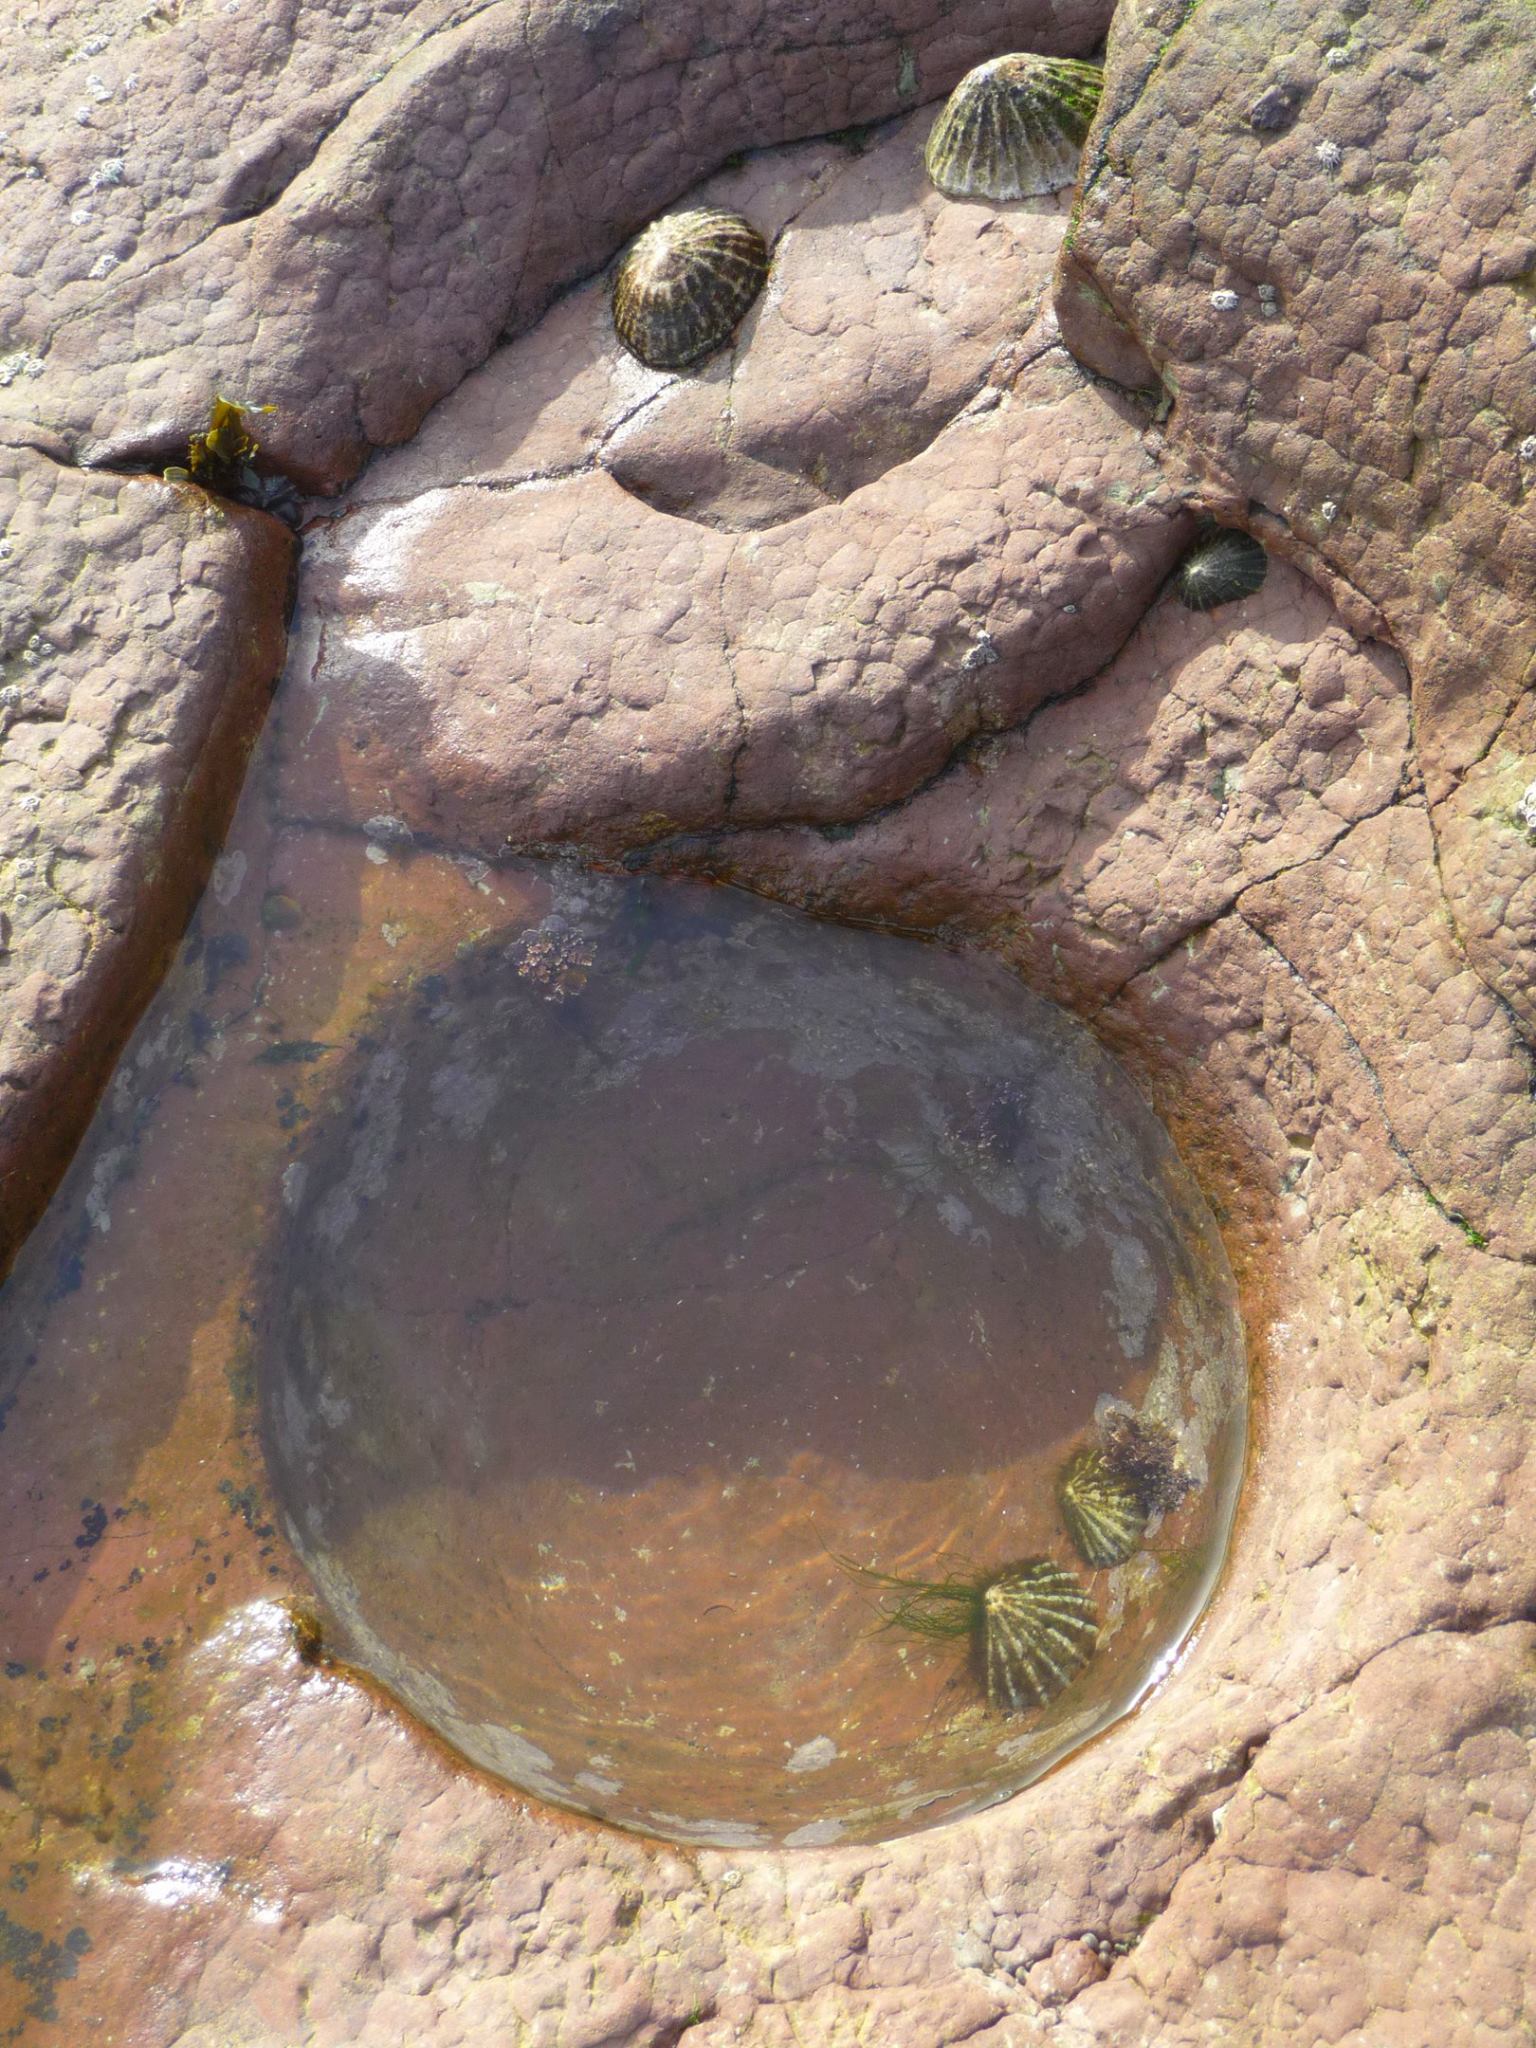 A naturally carved bowl in a sandstone rock playing home to a pair of limpets